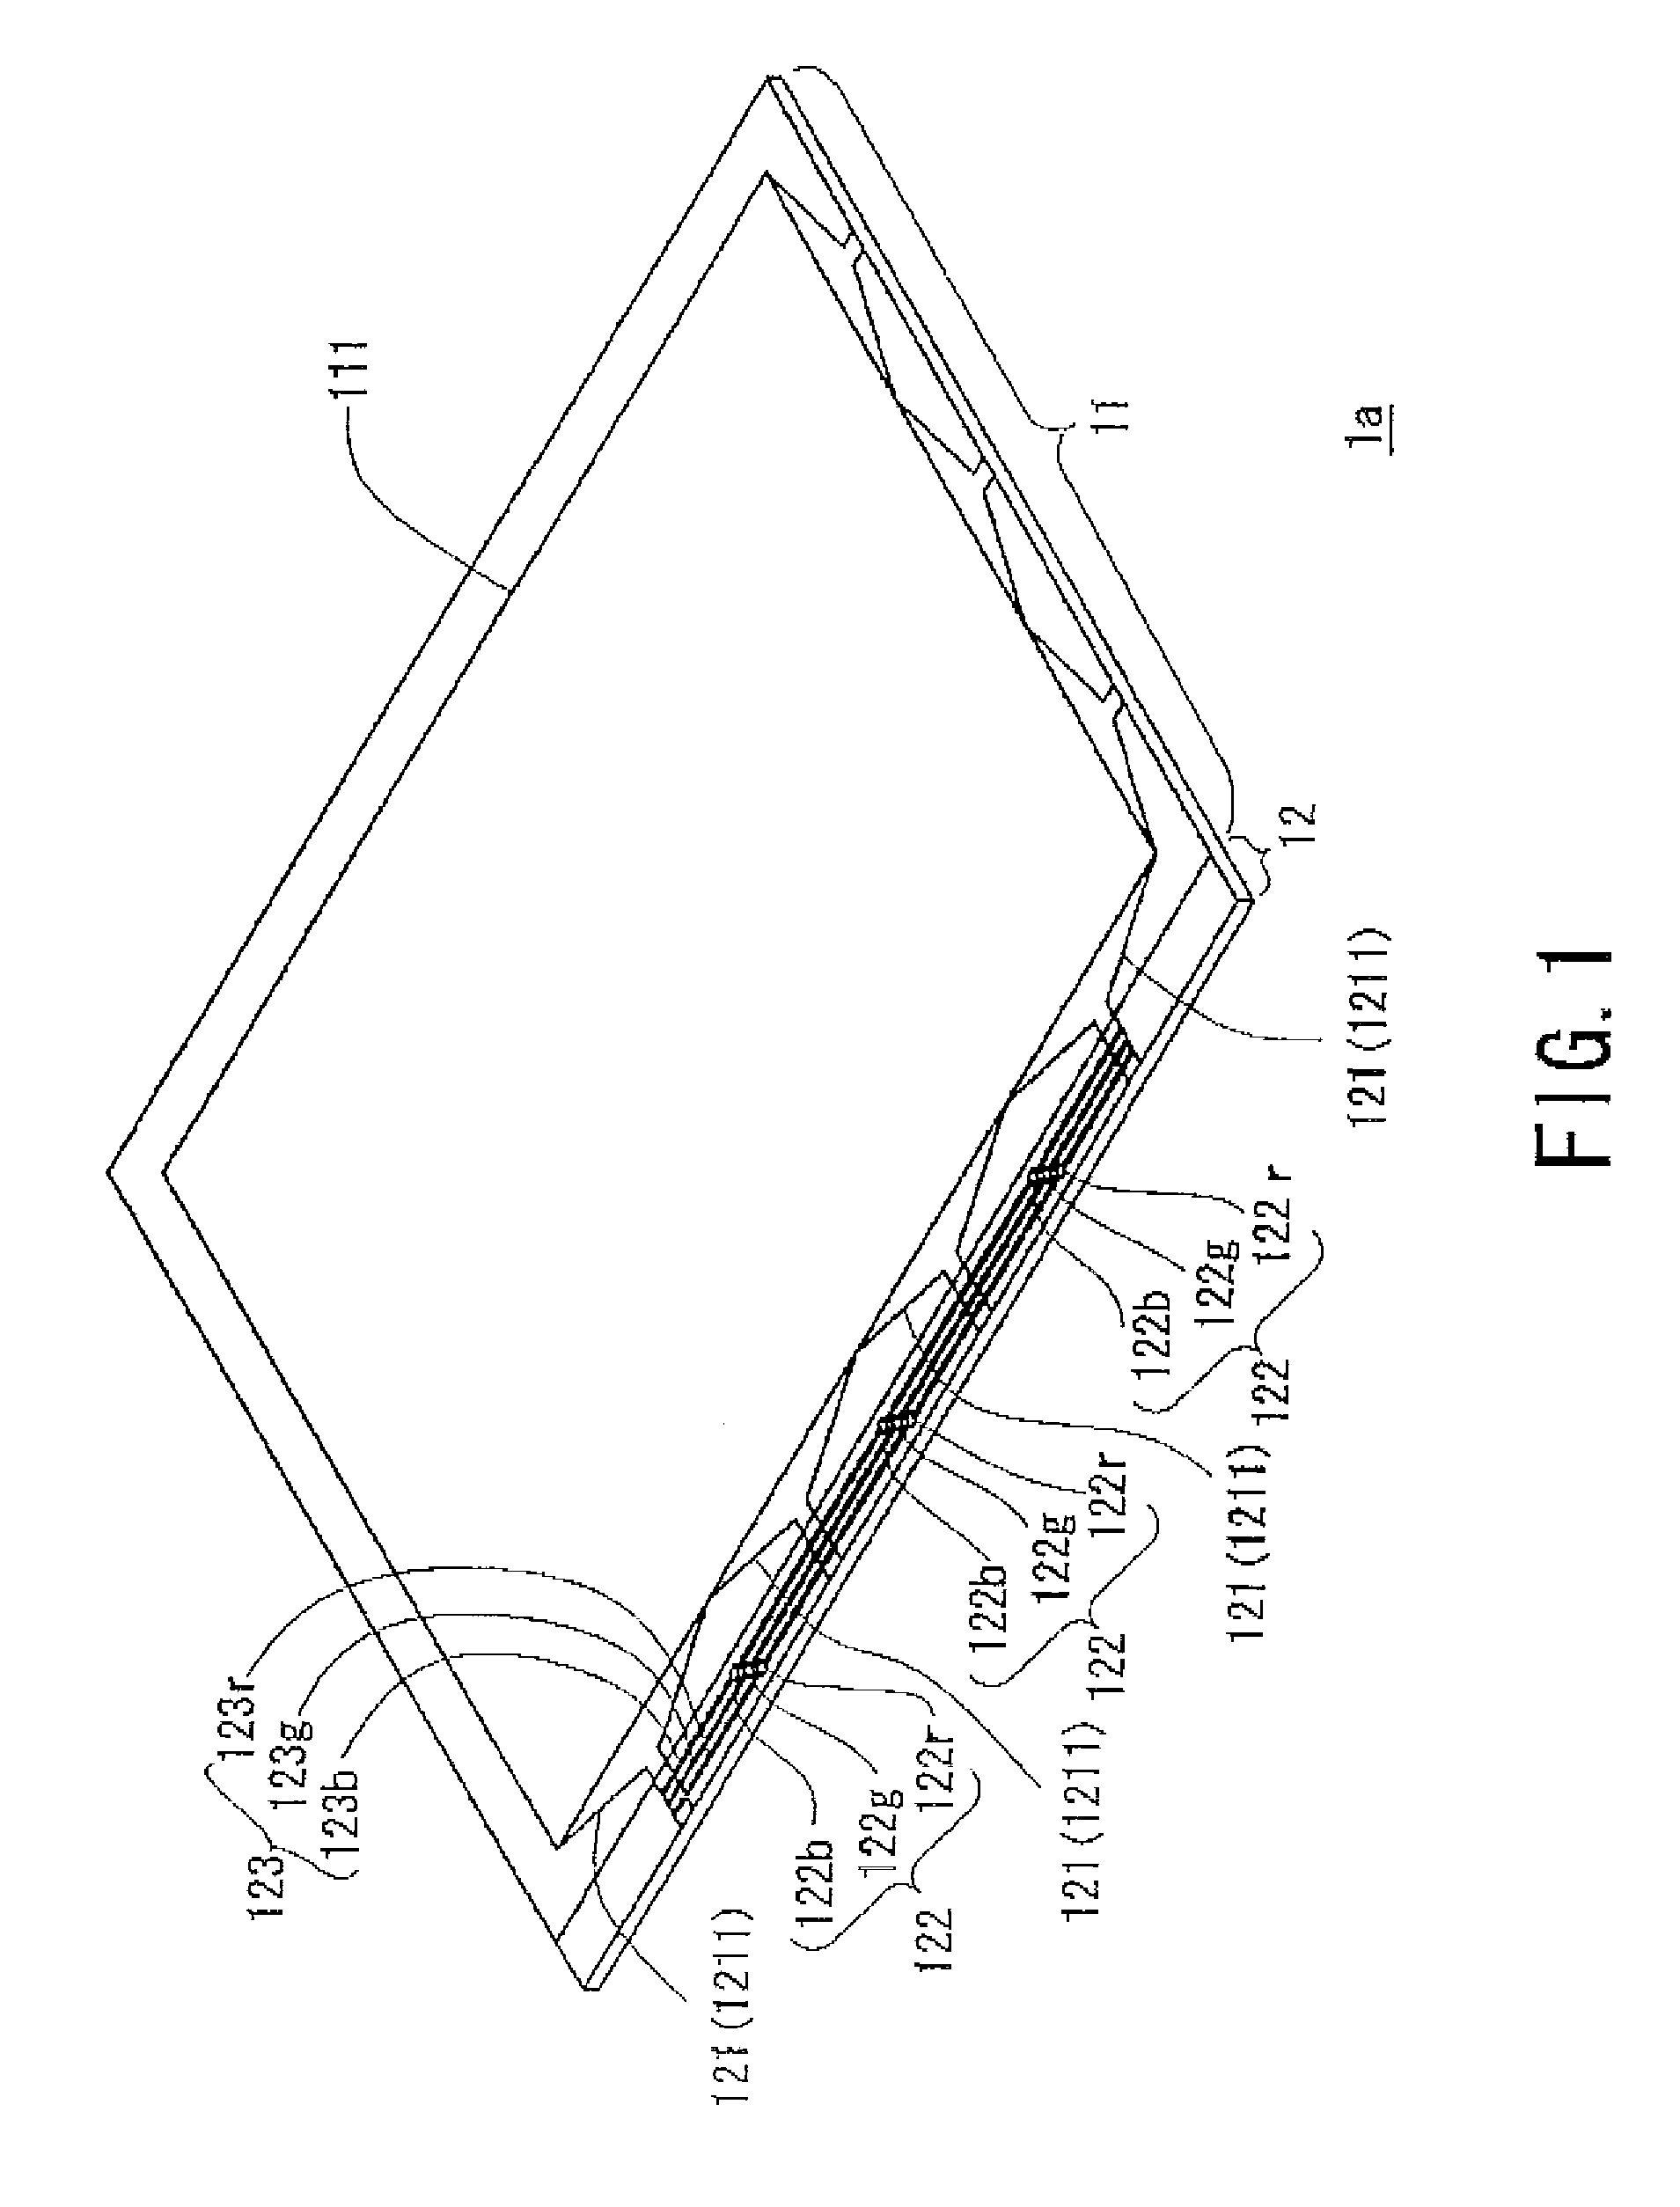 Substrate for a display panel, a display panel having the substrate, a production process of the substrate, and a production process of the display panel